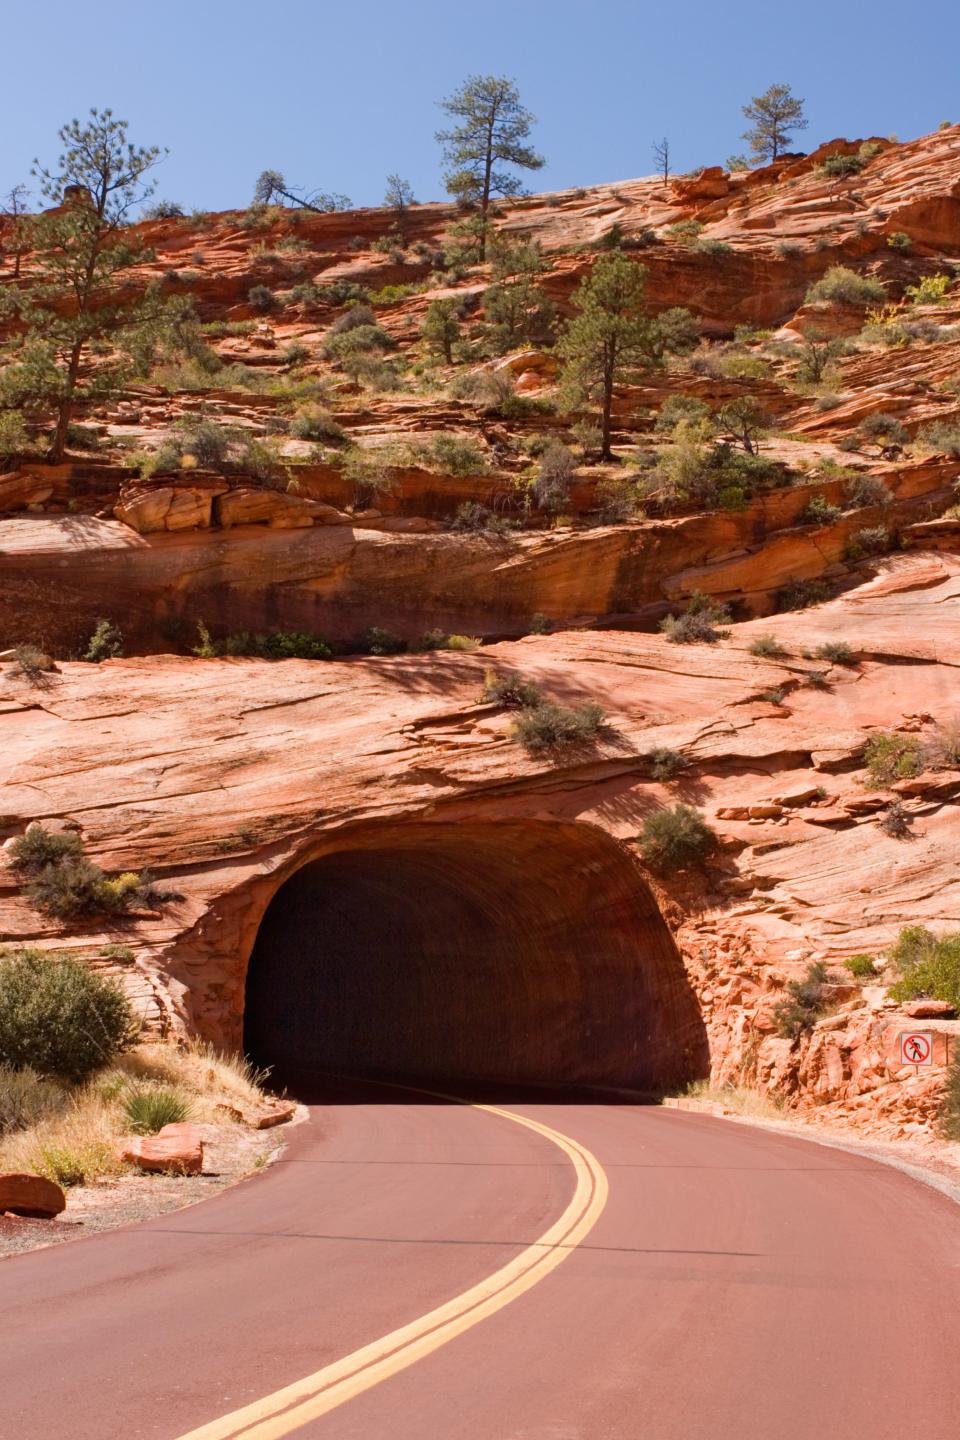 <p>Built in 1930, the Mount Carmel Highway cuts through a part of Arizona’s Zion National Park. When the route was completed, it shortened the distance from Zion, Arizona to Bryce, Utah, by 70 miles.</p>